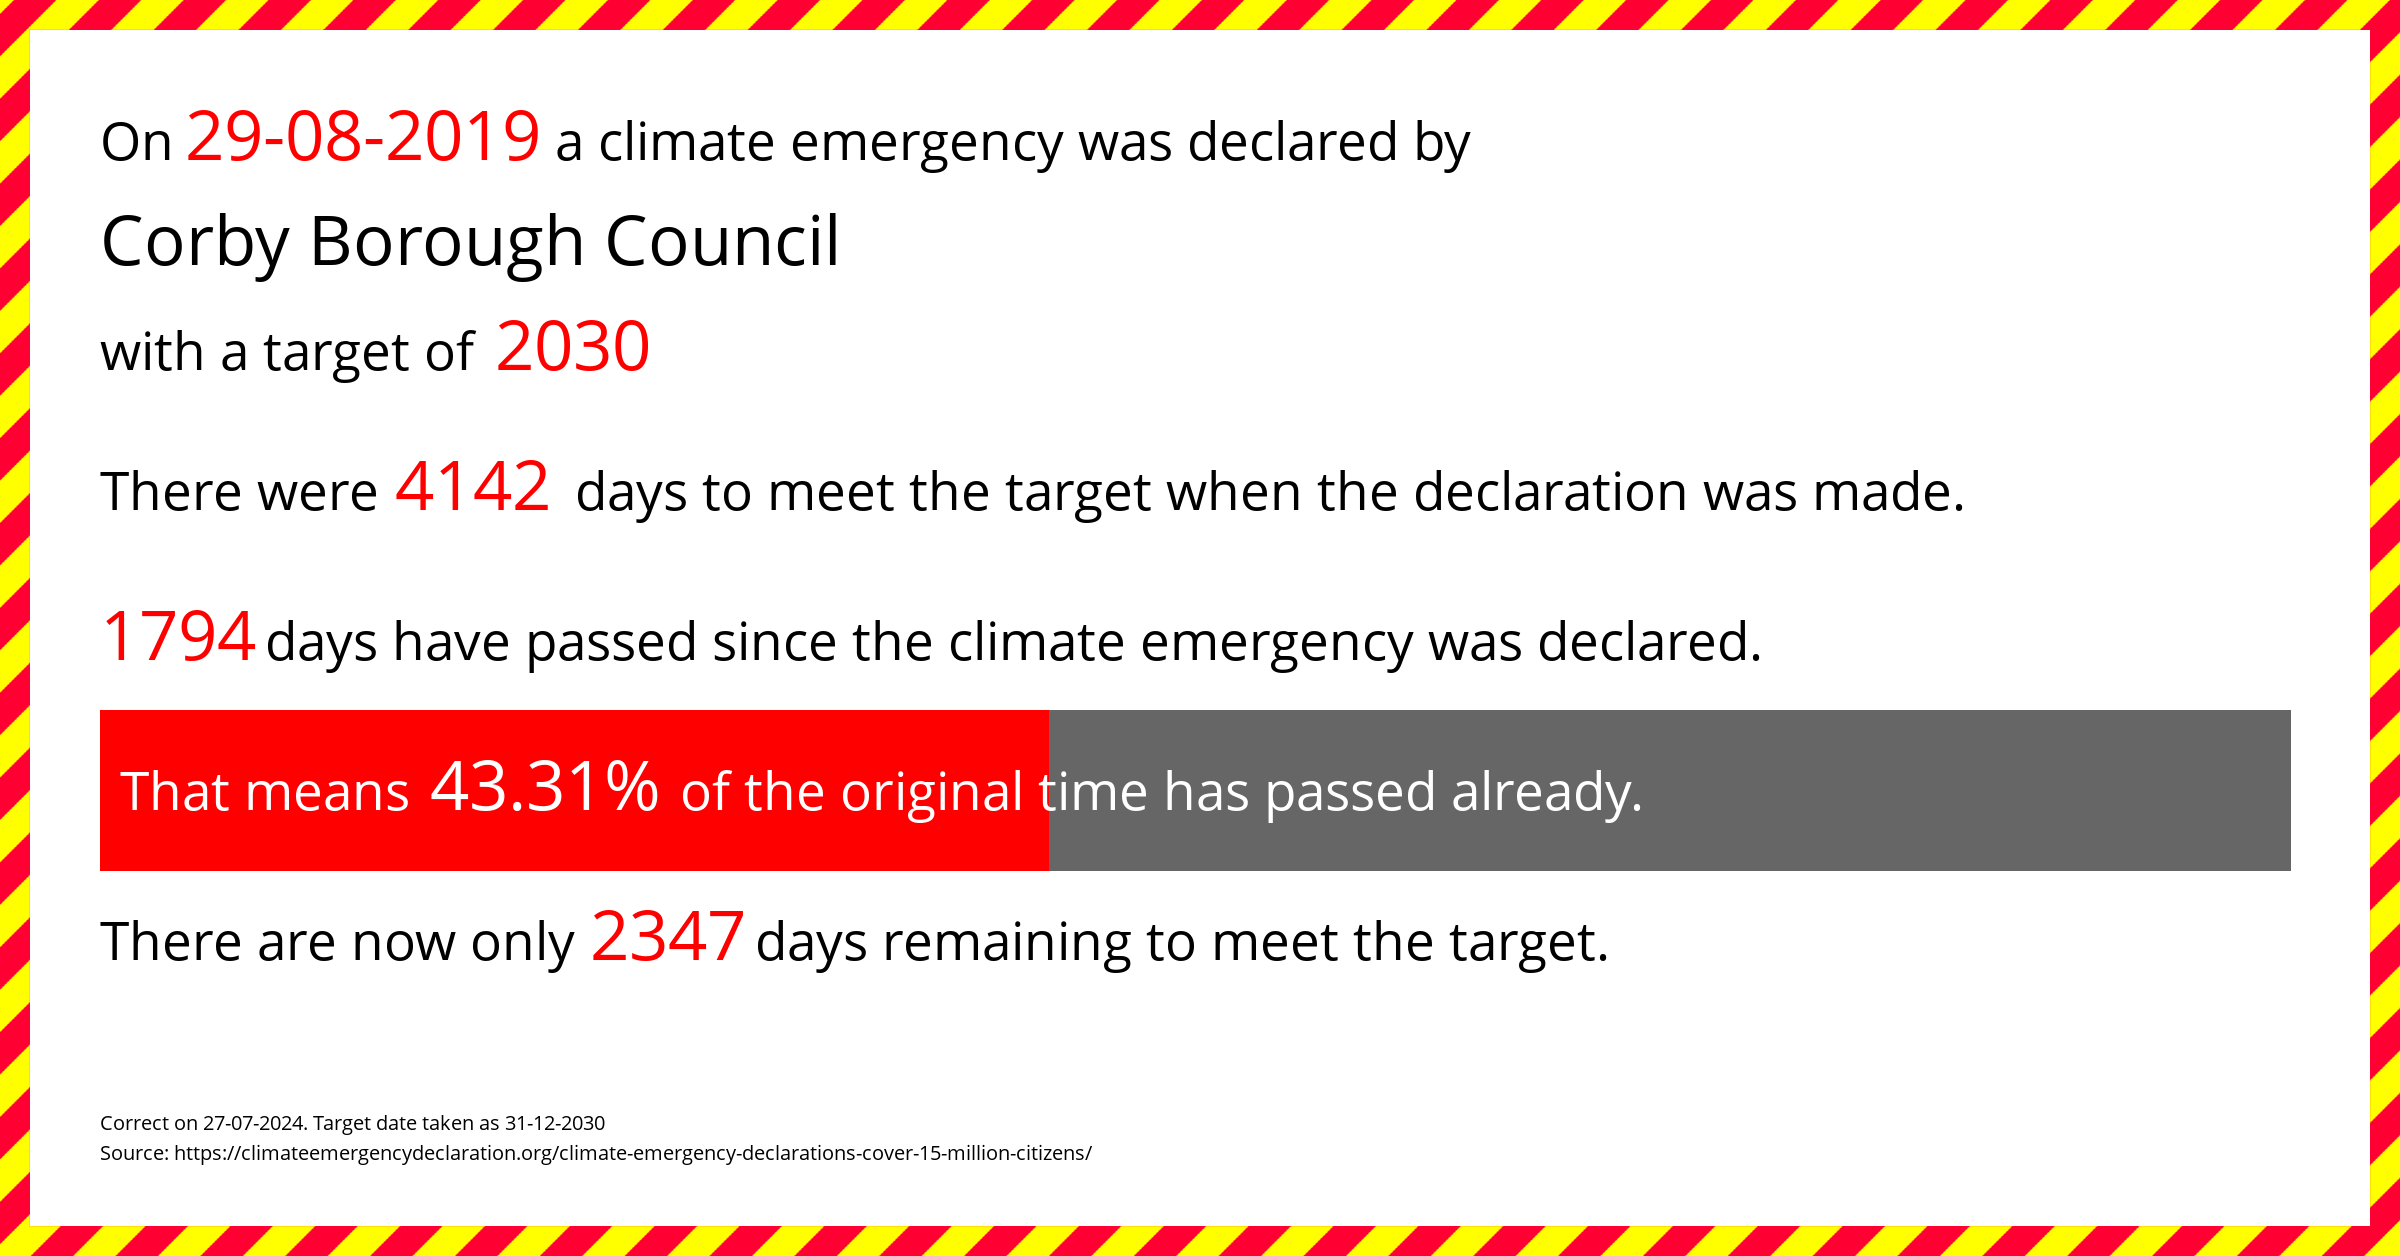 Corby Borough Council declared a Climate emergency on Thursday 29th August 2019, with a target of 2030.